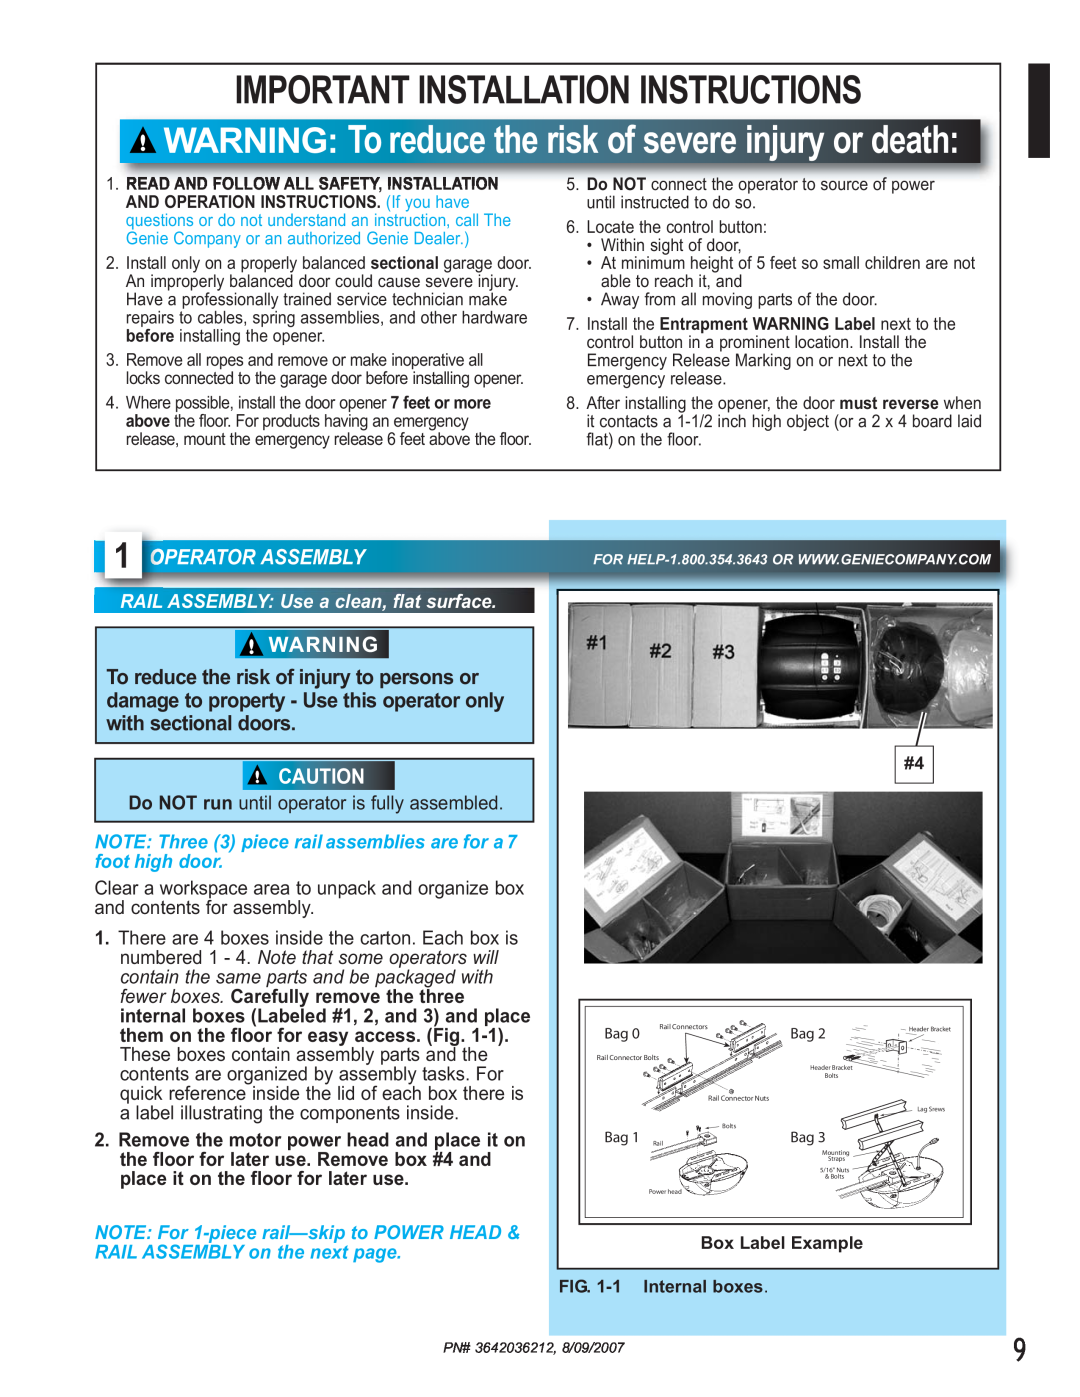 Genie 1022 Operator Assembly, Important Installation Instructions, WARNING Toreduce the risk of severe injury or death 